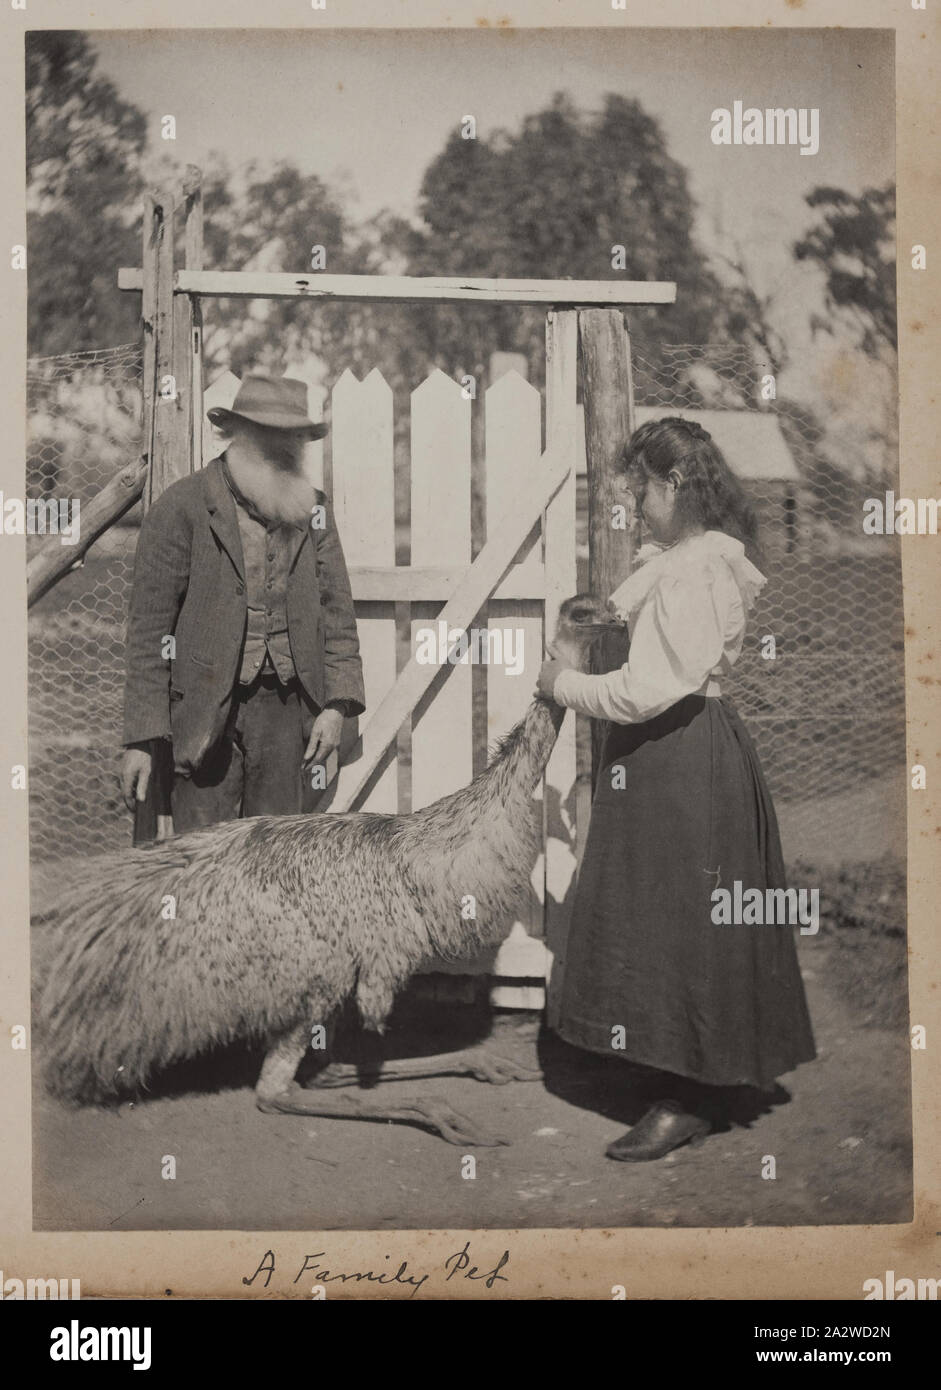 Photograph - by A.J. Campbell, Victoria, circa 1900, A young girl with a pet emu. There is a bearded man with her and they appear to be in an enclosure Stock Photo